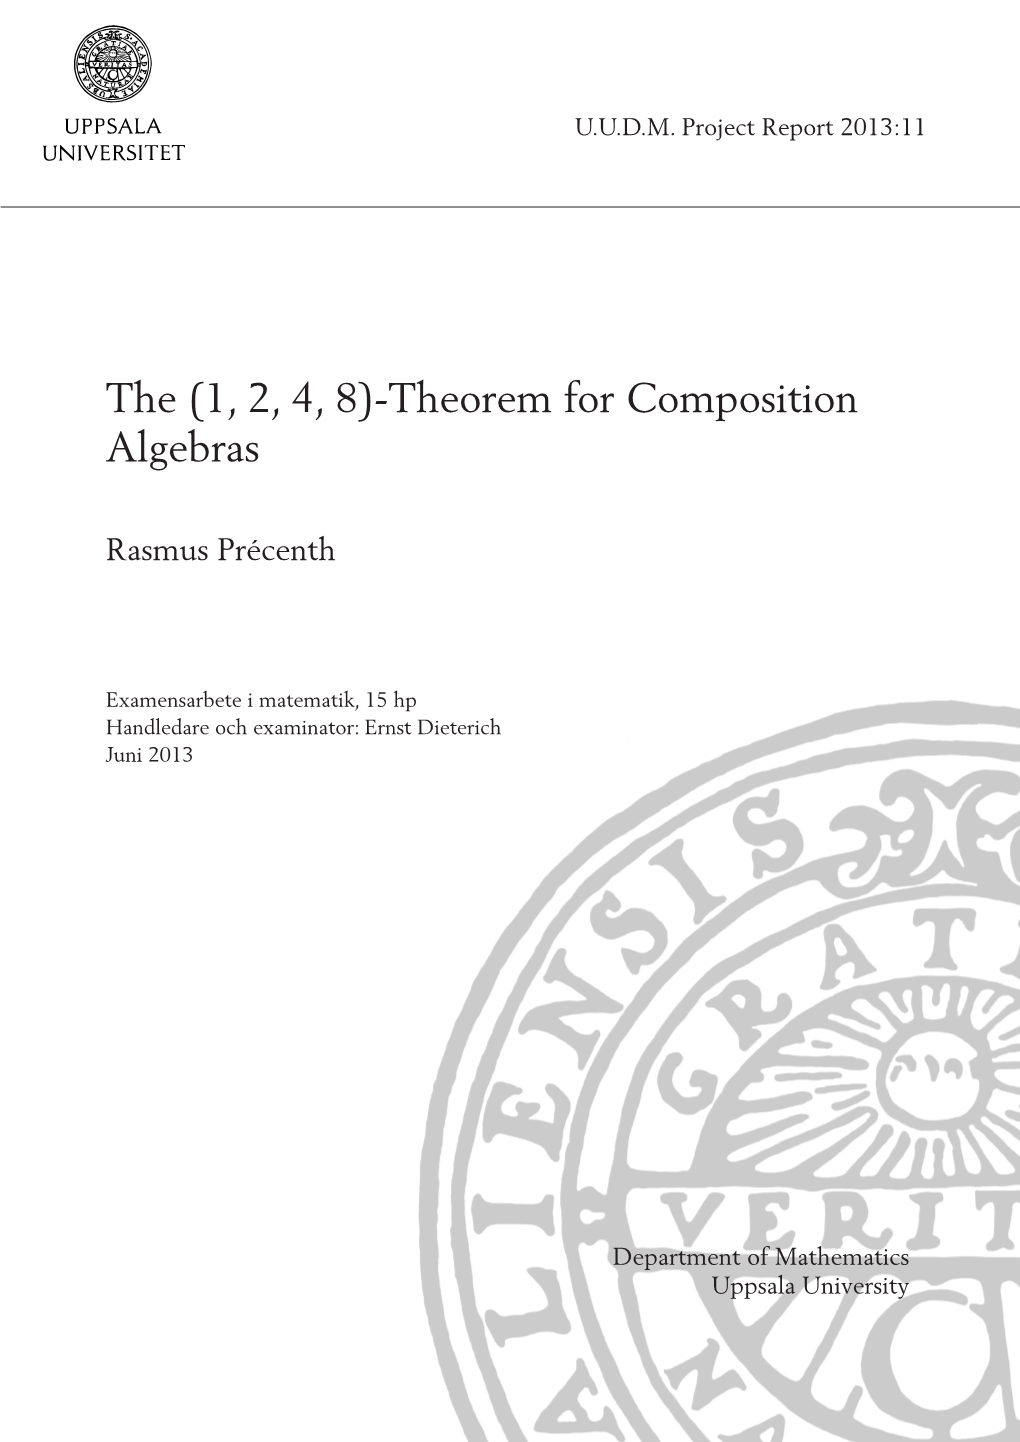 The (1, 2, 4, 8)-Theorem for Composition Algebras